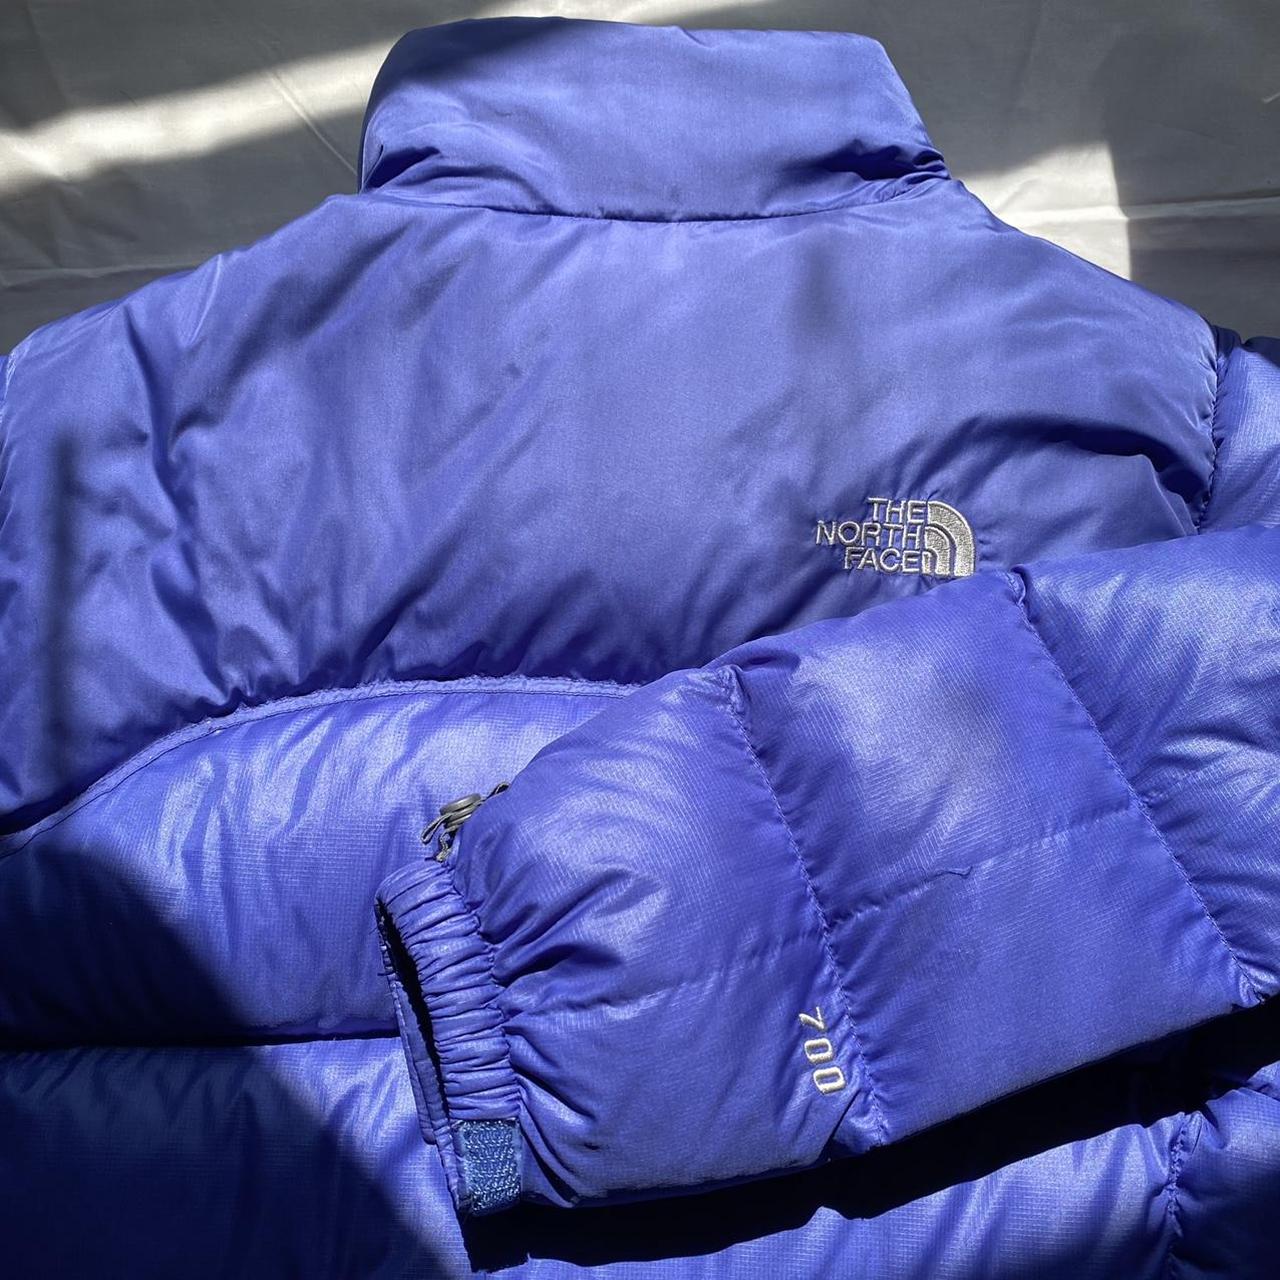 Product Image 2 - THE NORTH FACE PUFFER 700